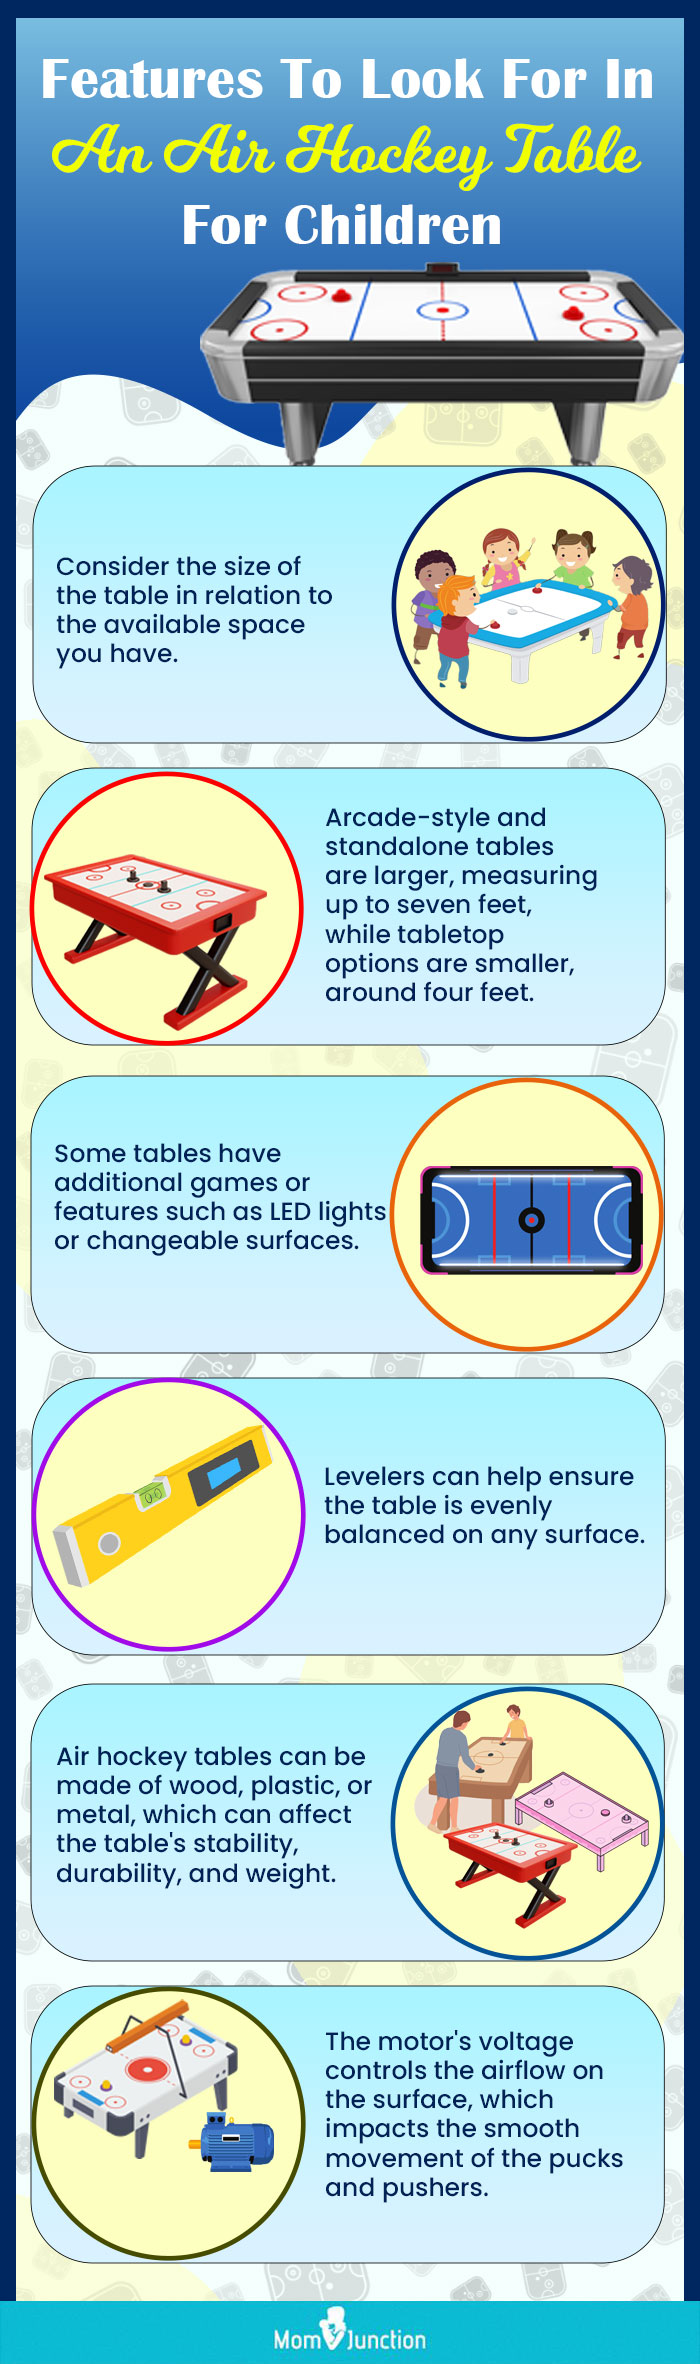 Features-To-Look-For-In-An-Air-Hockey-Table-For-Children (infographic)